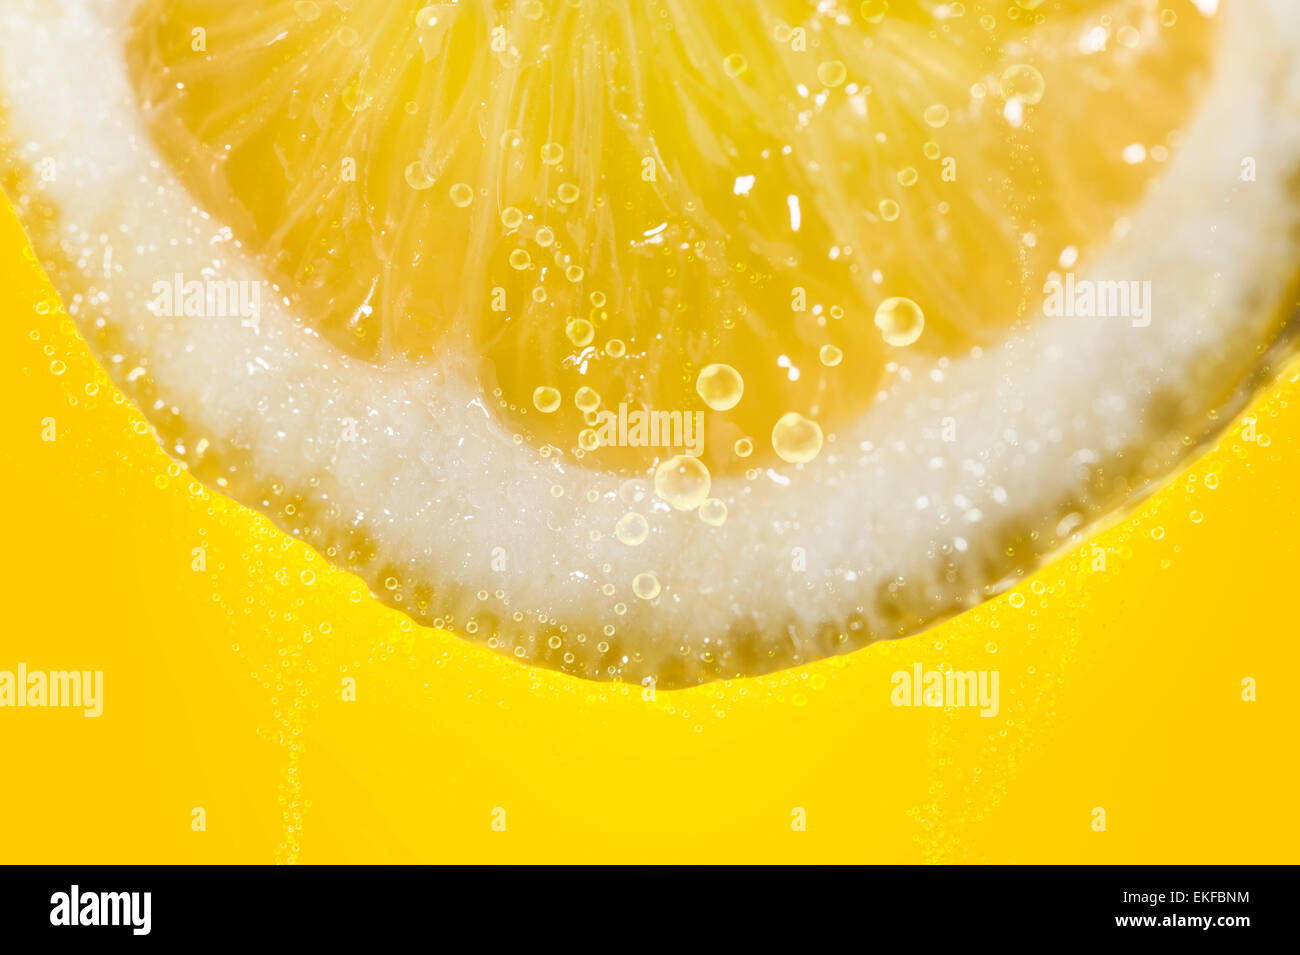 slice of lemon close up, dipped in sparkling water Stock Photo